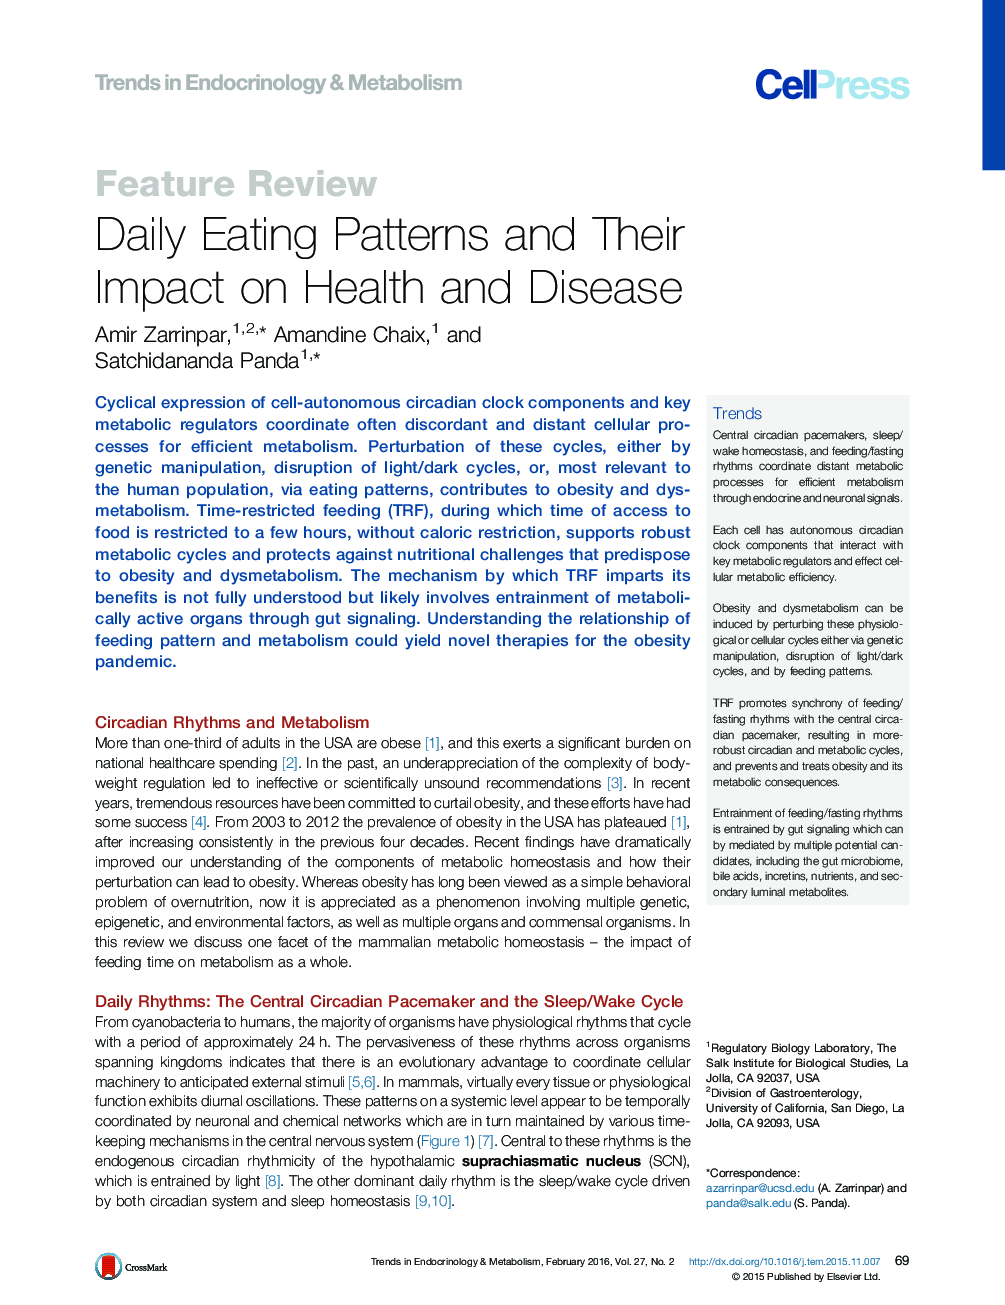 Daily Eating Patterns and Their Impact on Health and Disease